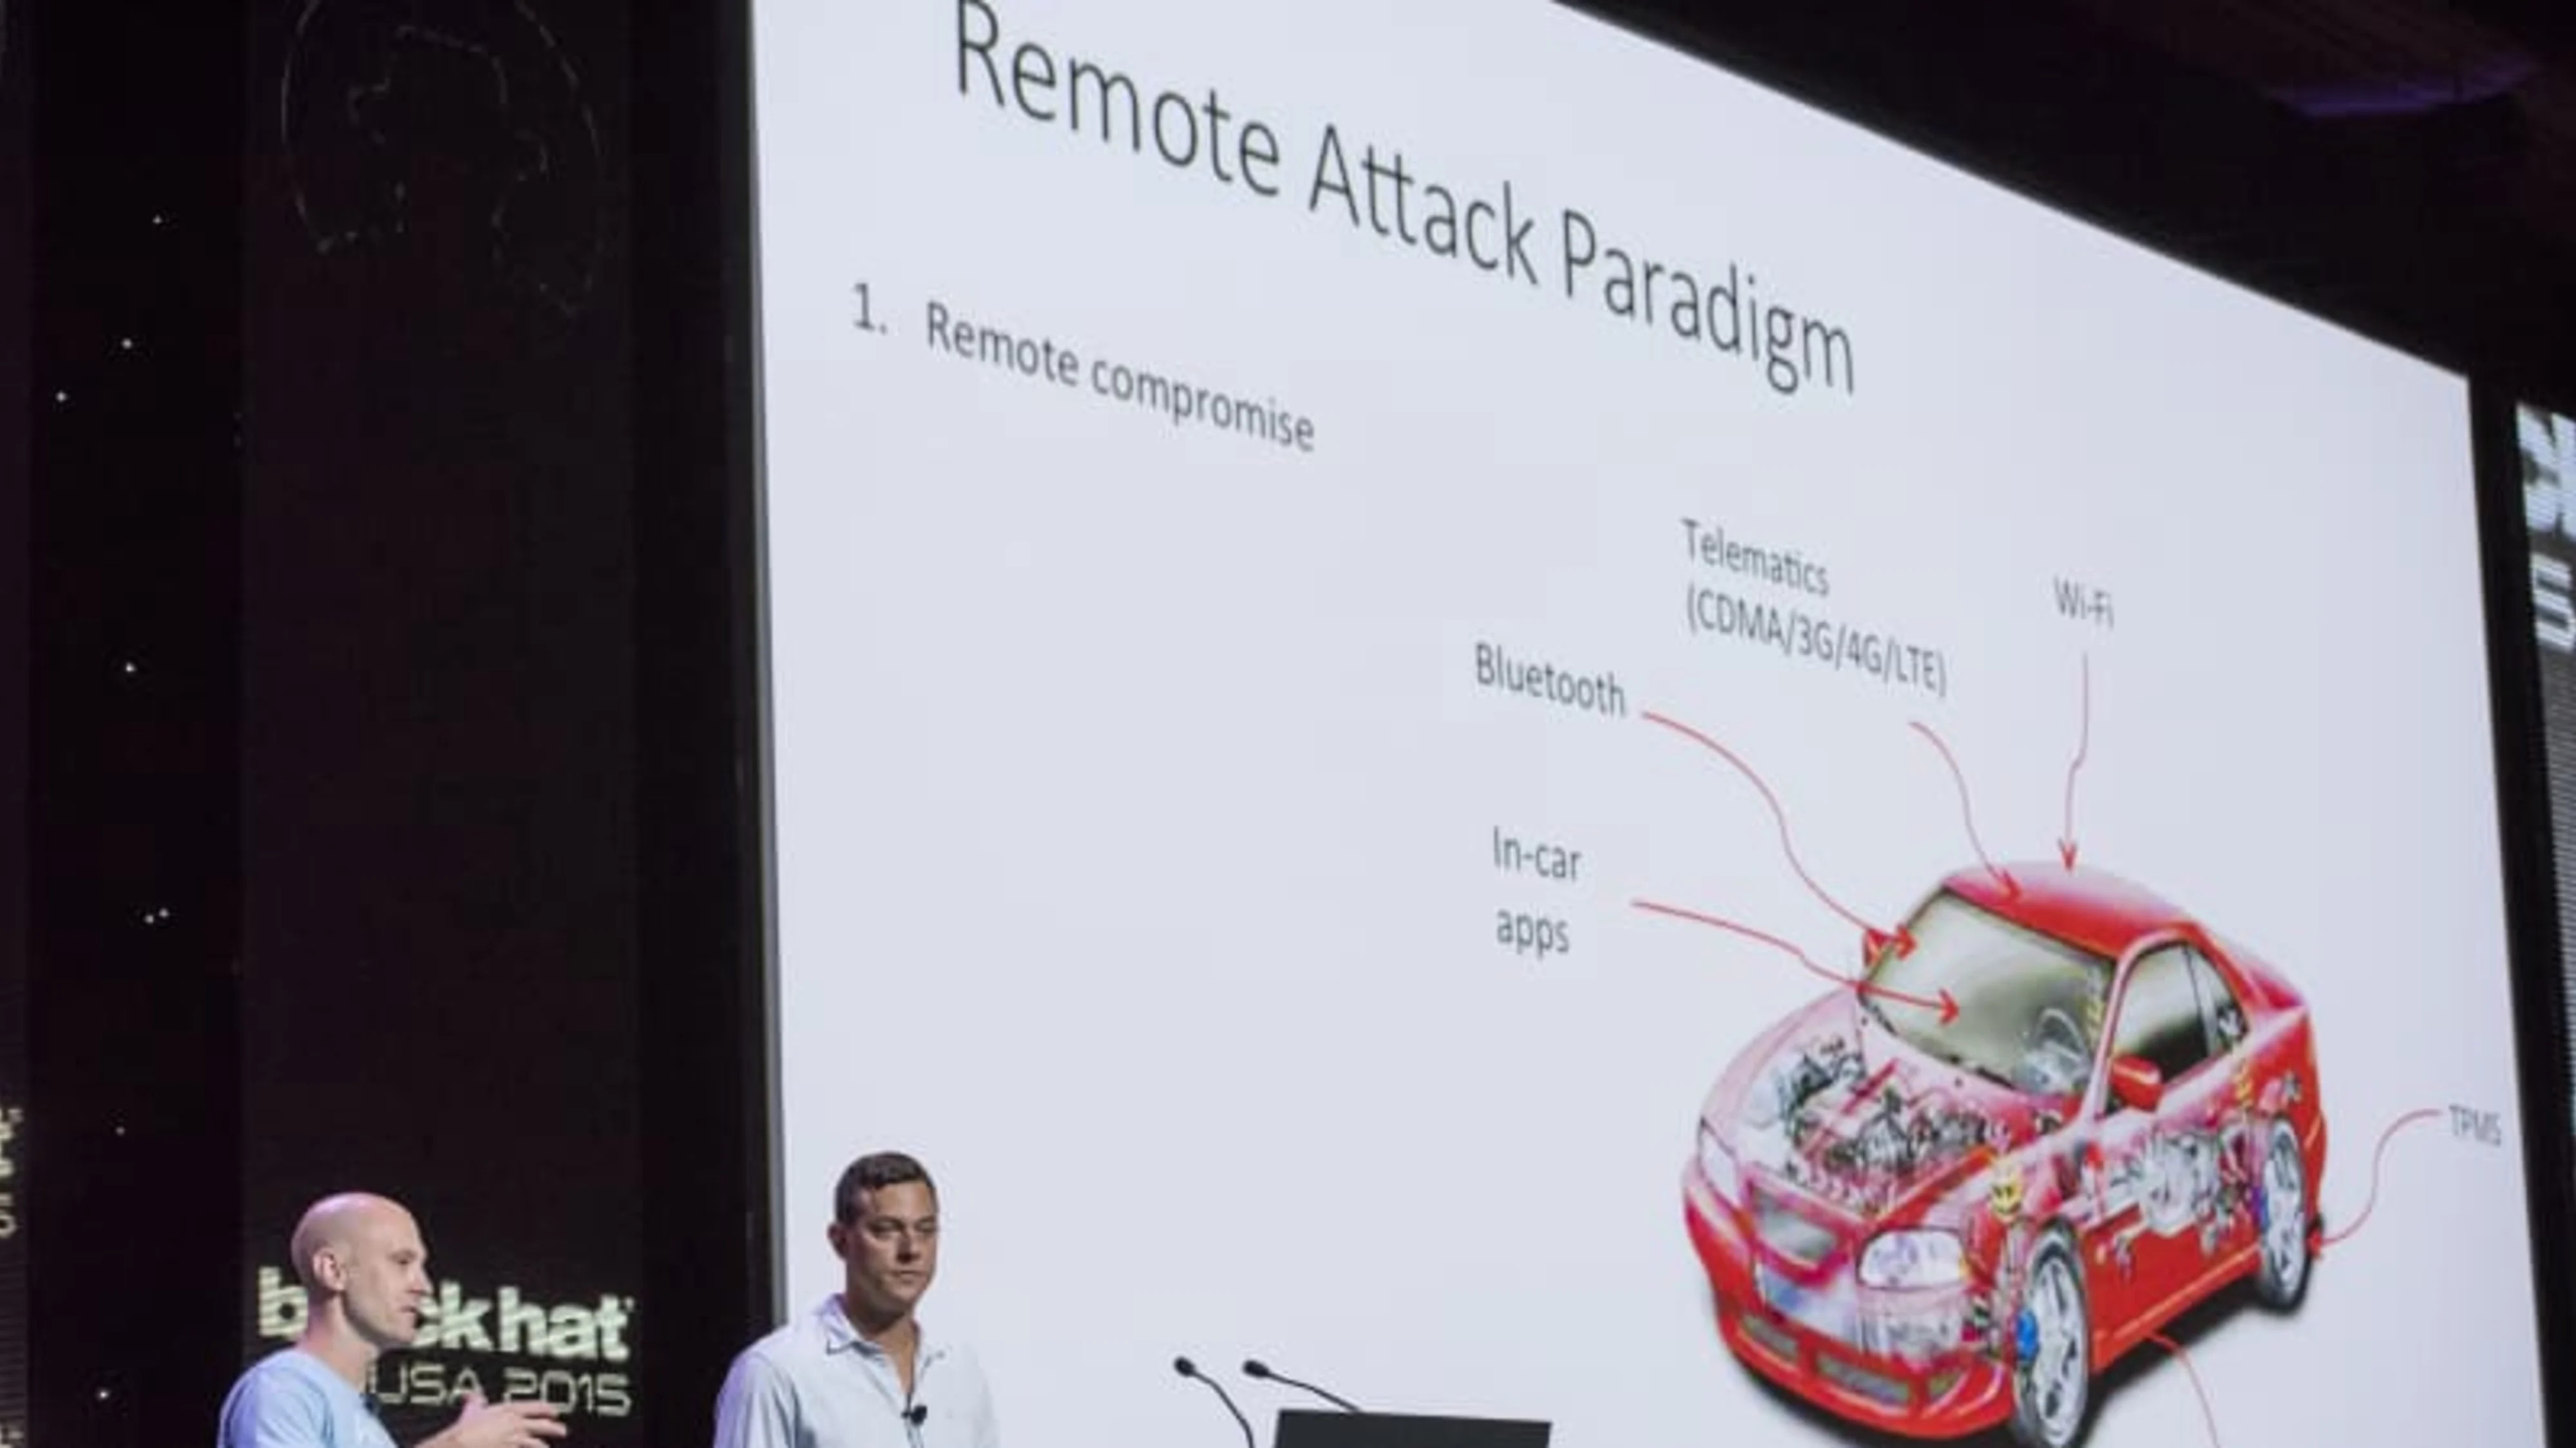 Remote Exploitation Of An Unaltered Passenger Vehicle At The Black Hat Conference